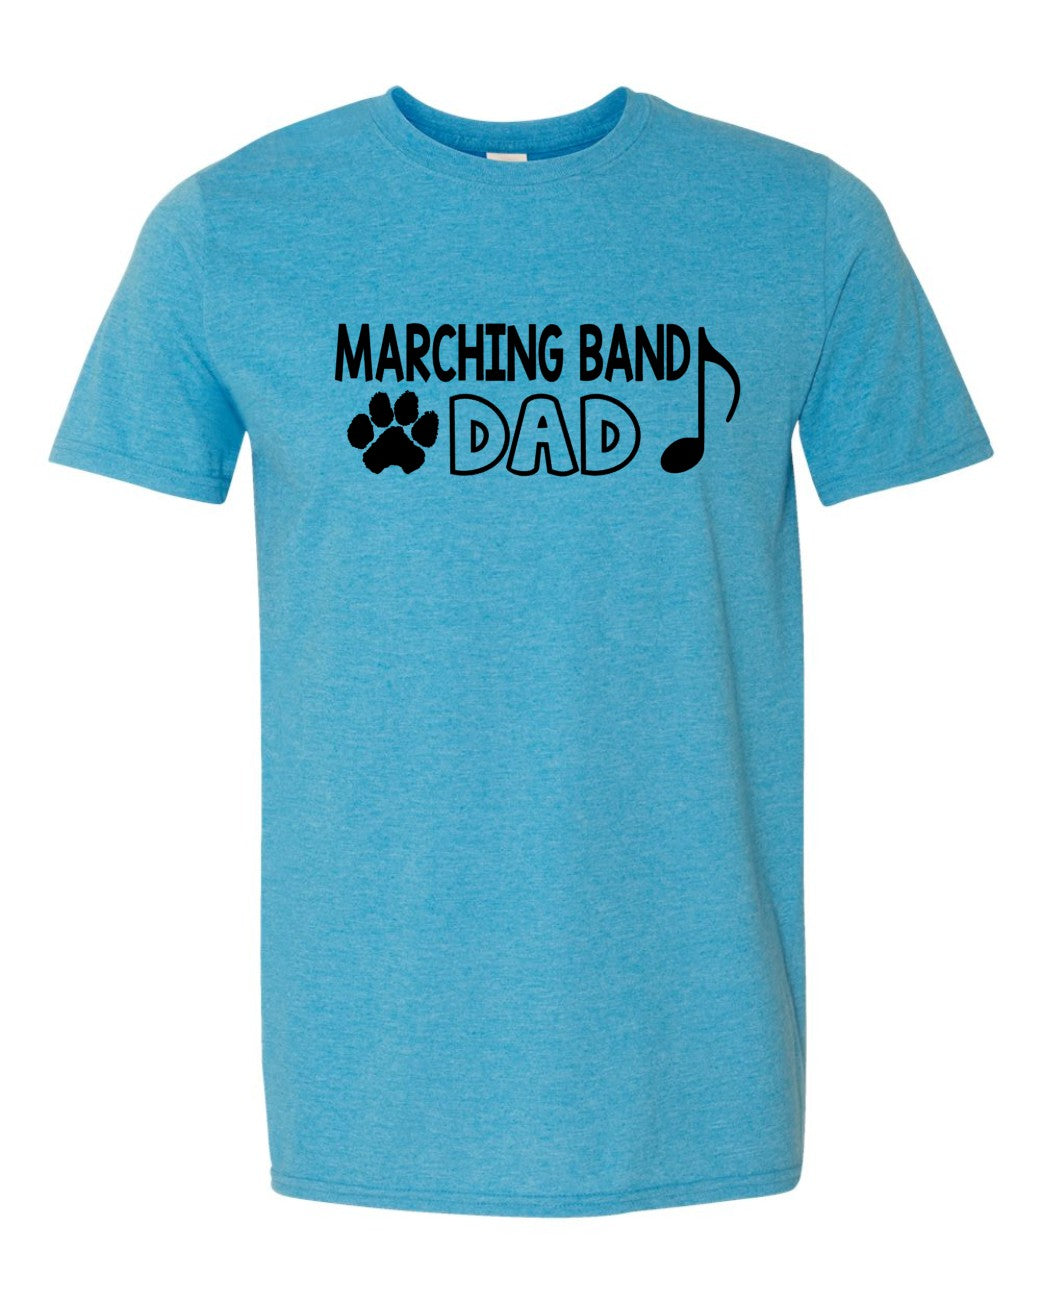 Marching Band Dad Tee